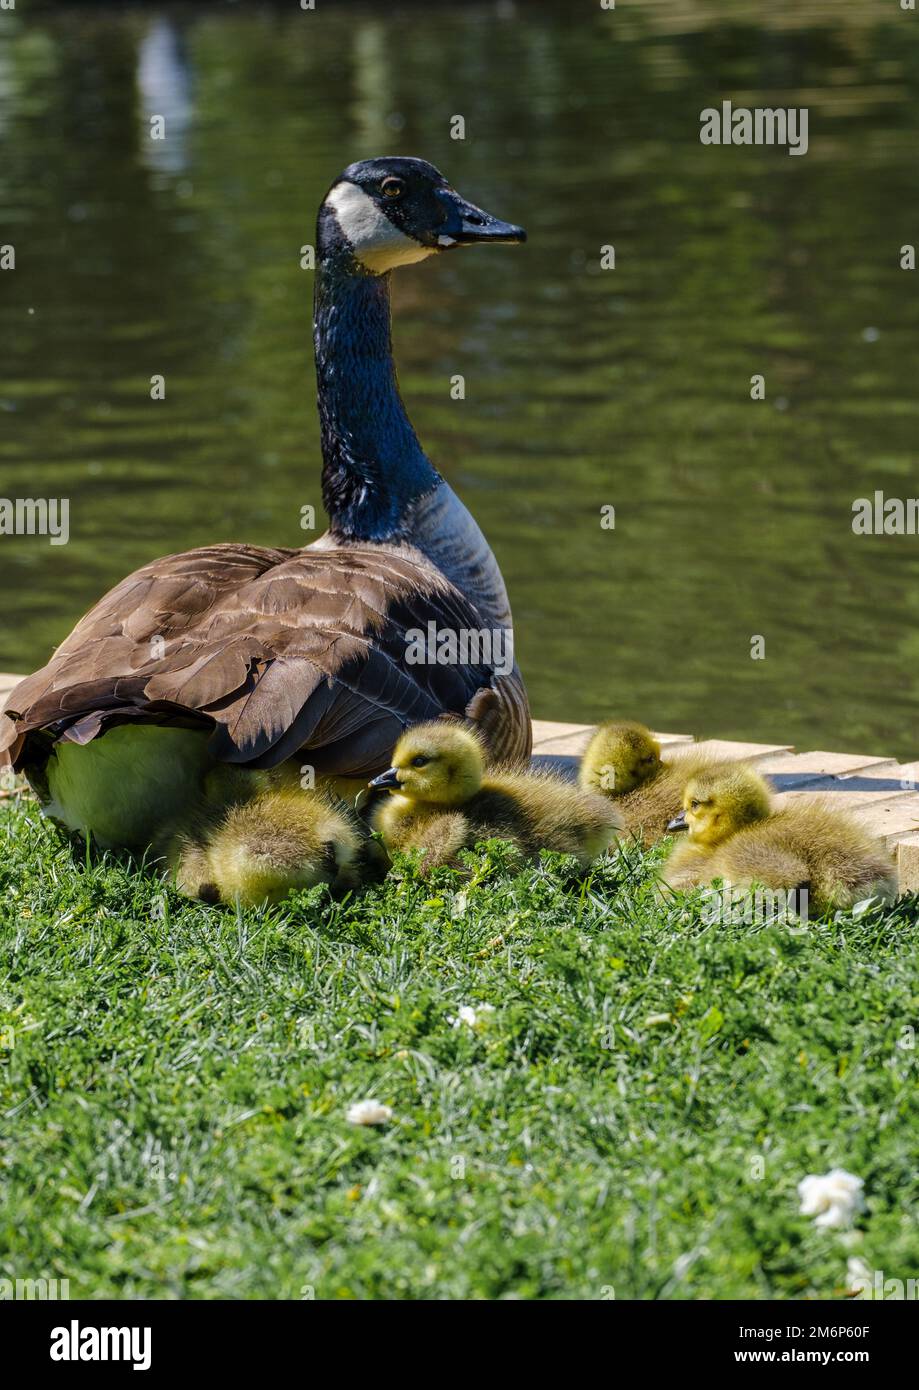 Canada goose watches over light yellow goslings on grass next to pond at local park on Spring day. Stock Photo